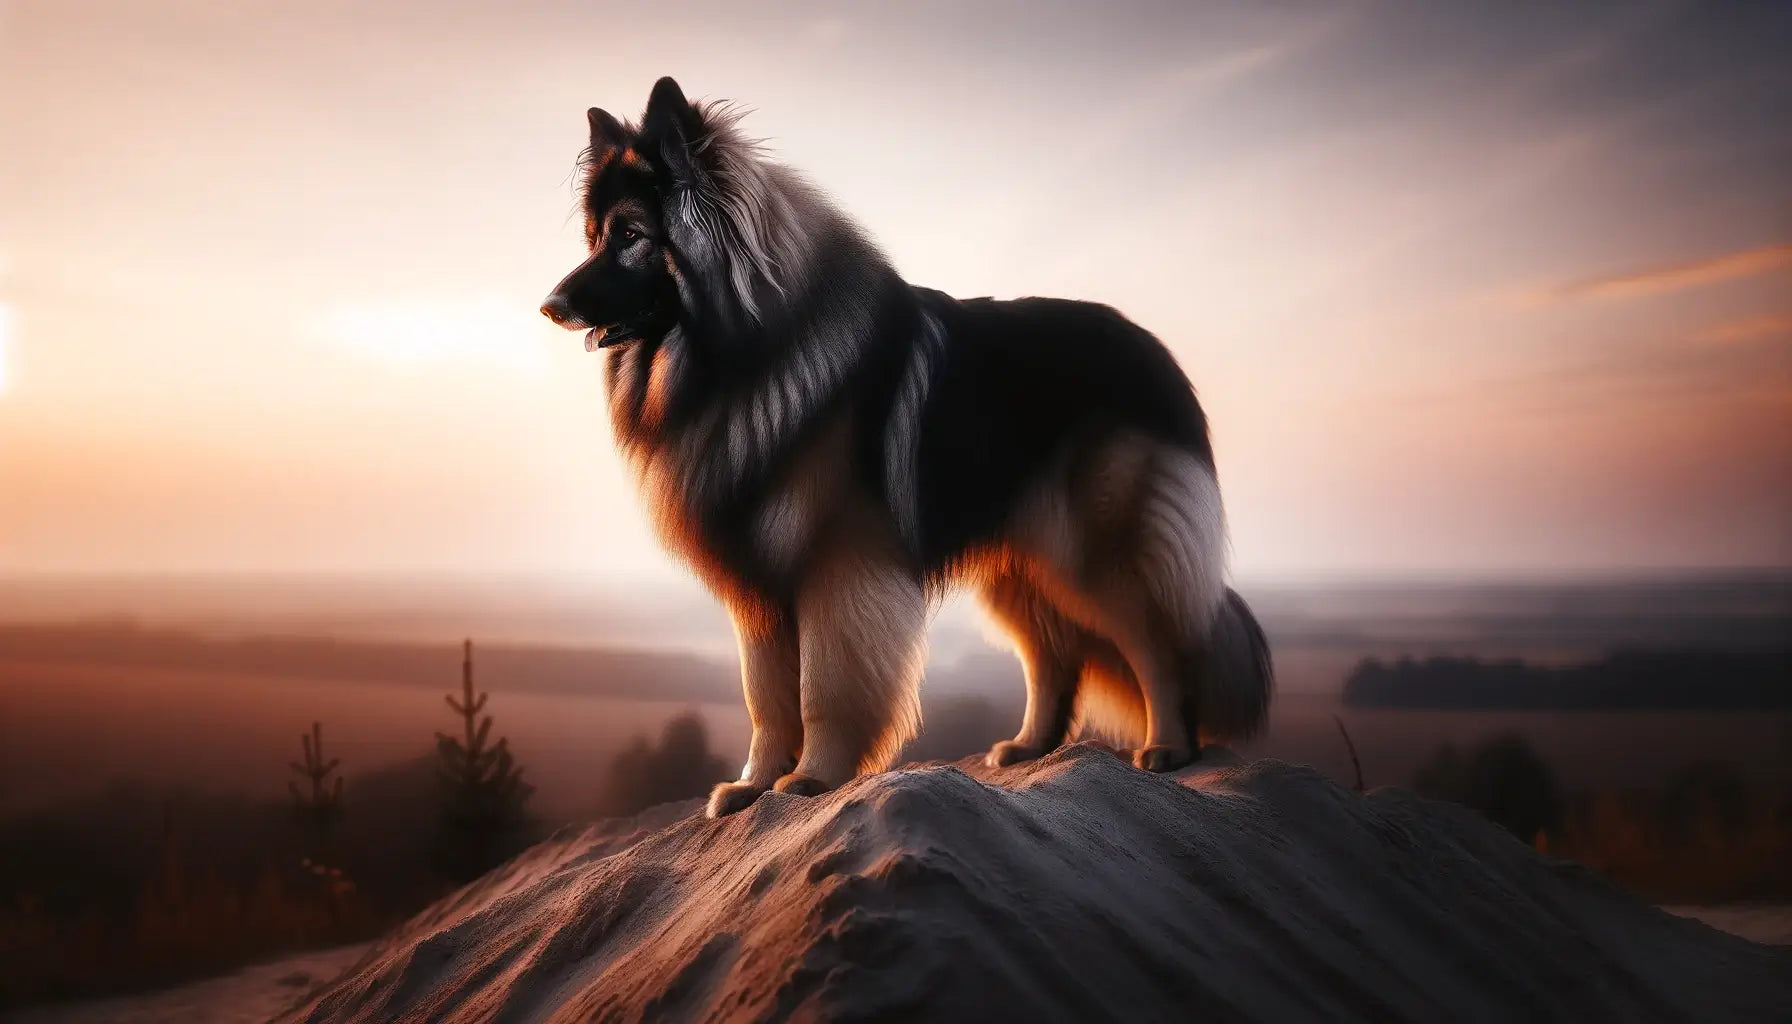 A Shiloh Shepherd shown from a side profile atop a hill or mound, displaying its alert stance and thick fur.